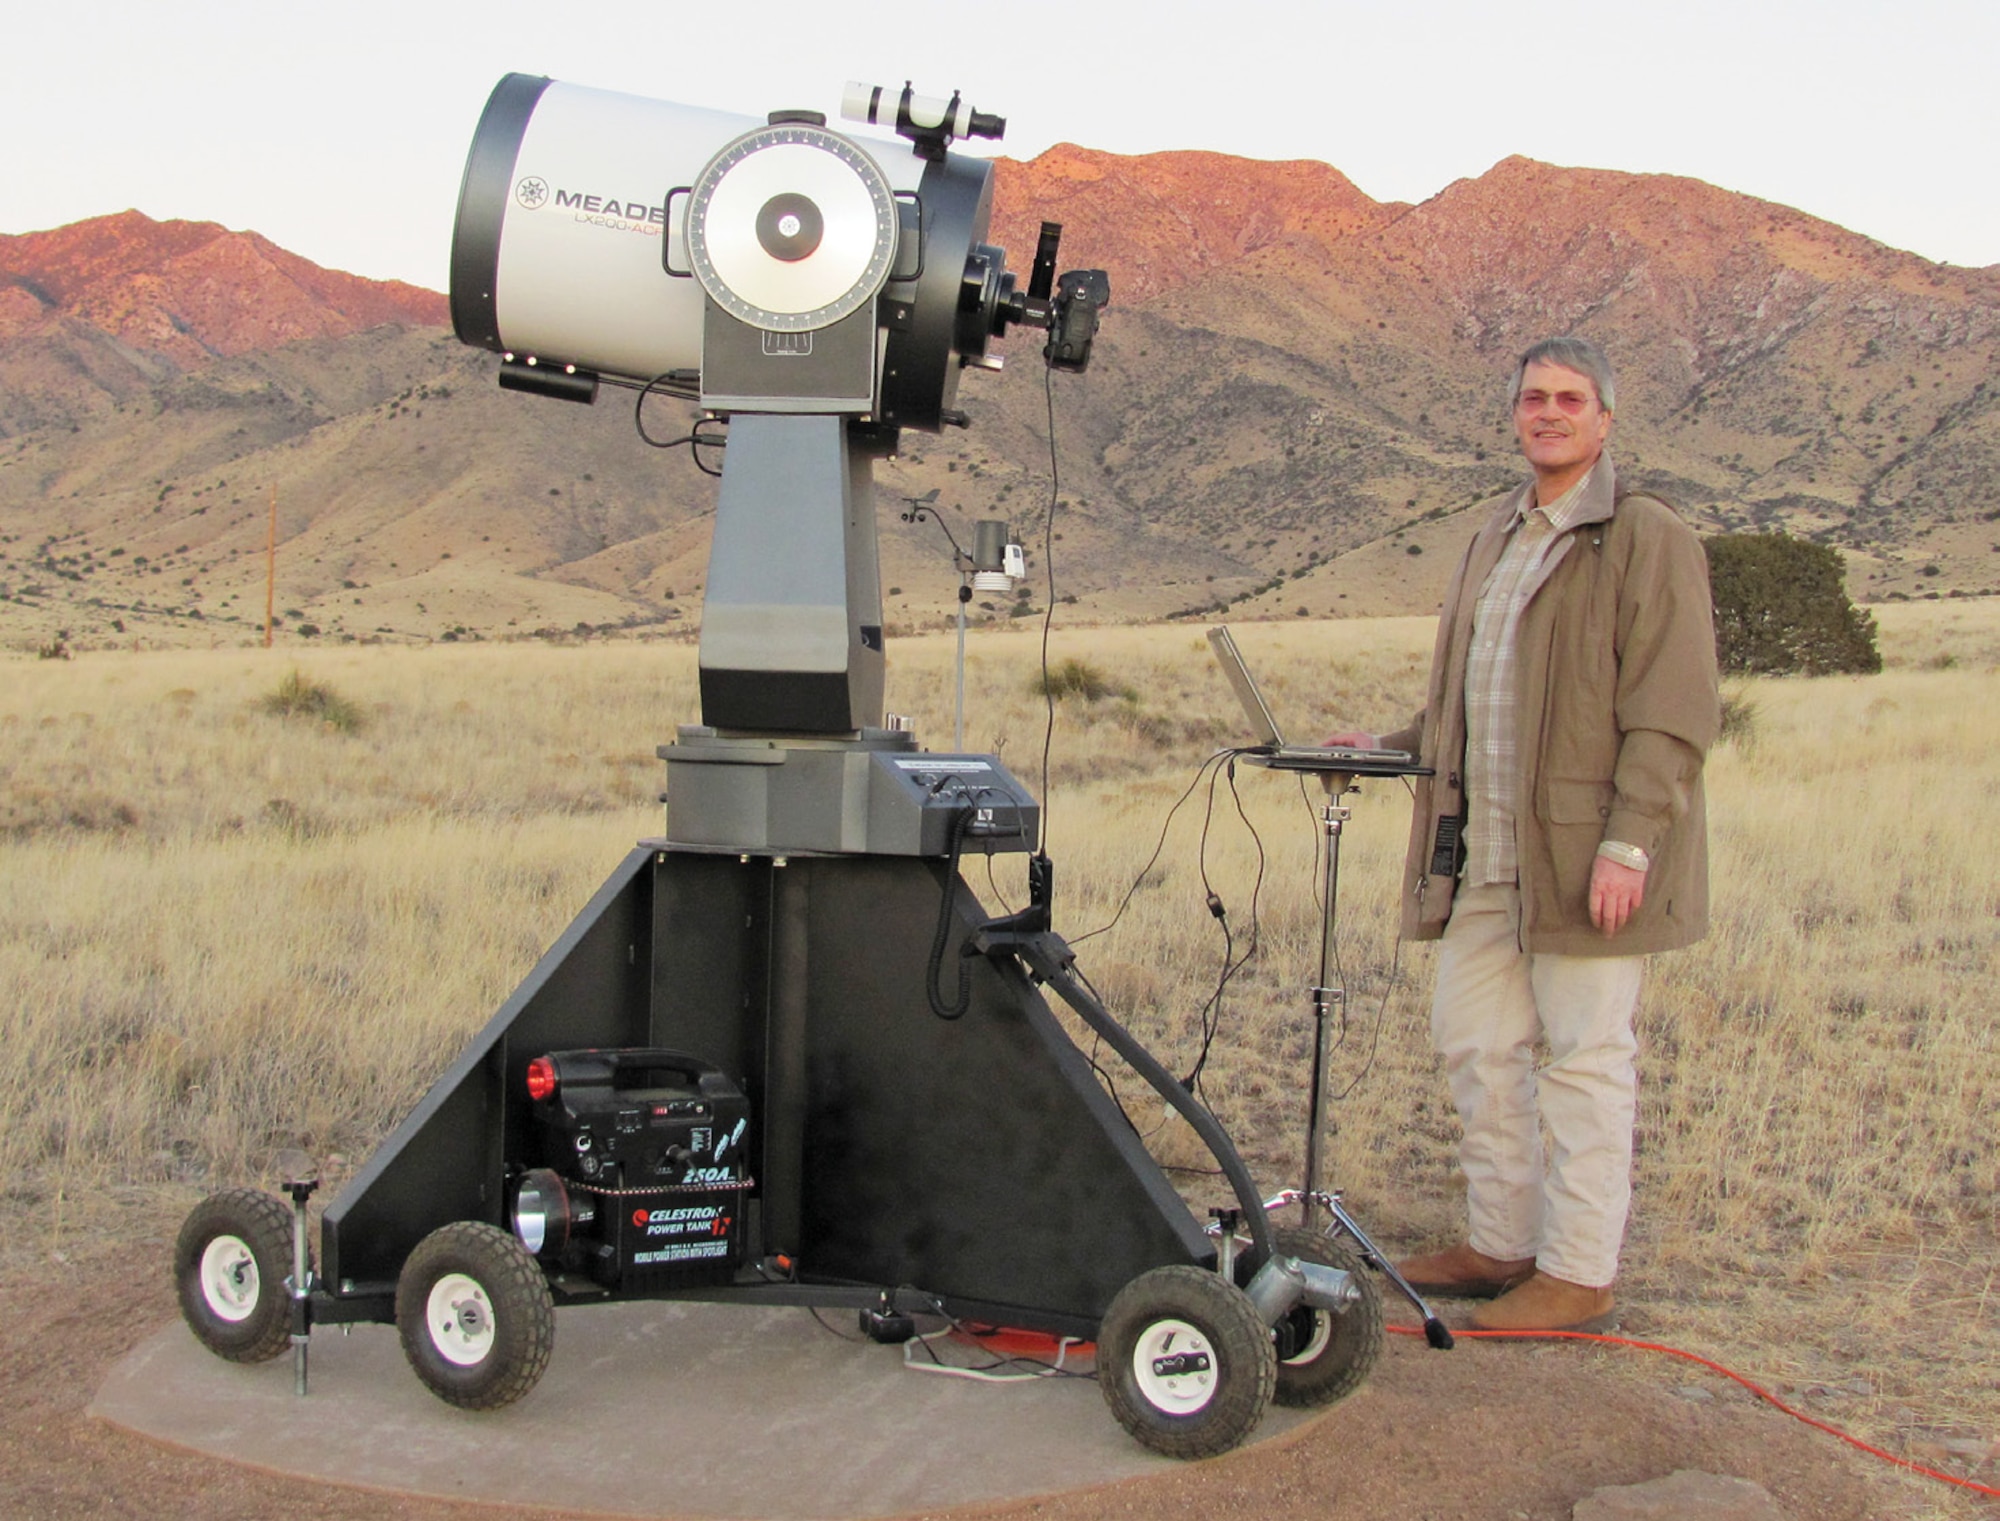 Richard Rast, senior engineer with the Air Force Research Laboratory’s Satellite Assessment Center, stands by a 16-inch diameter telescope.  Small telescopes are less expensive and more portable than large telescopes. Small telescopes are less expensive and more portable than large telescopes.